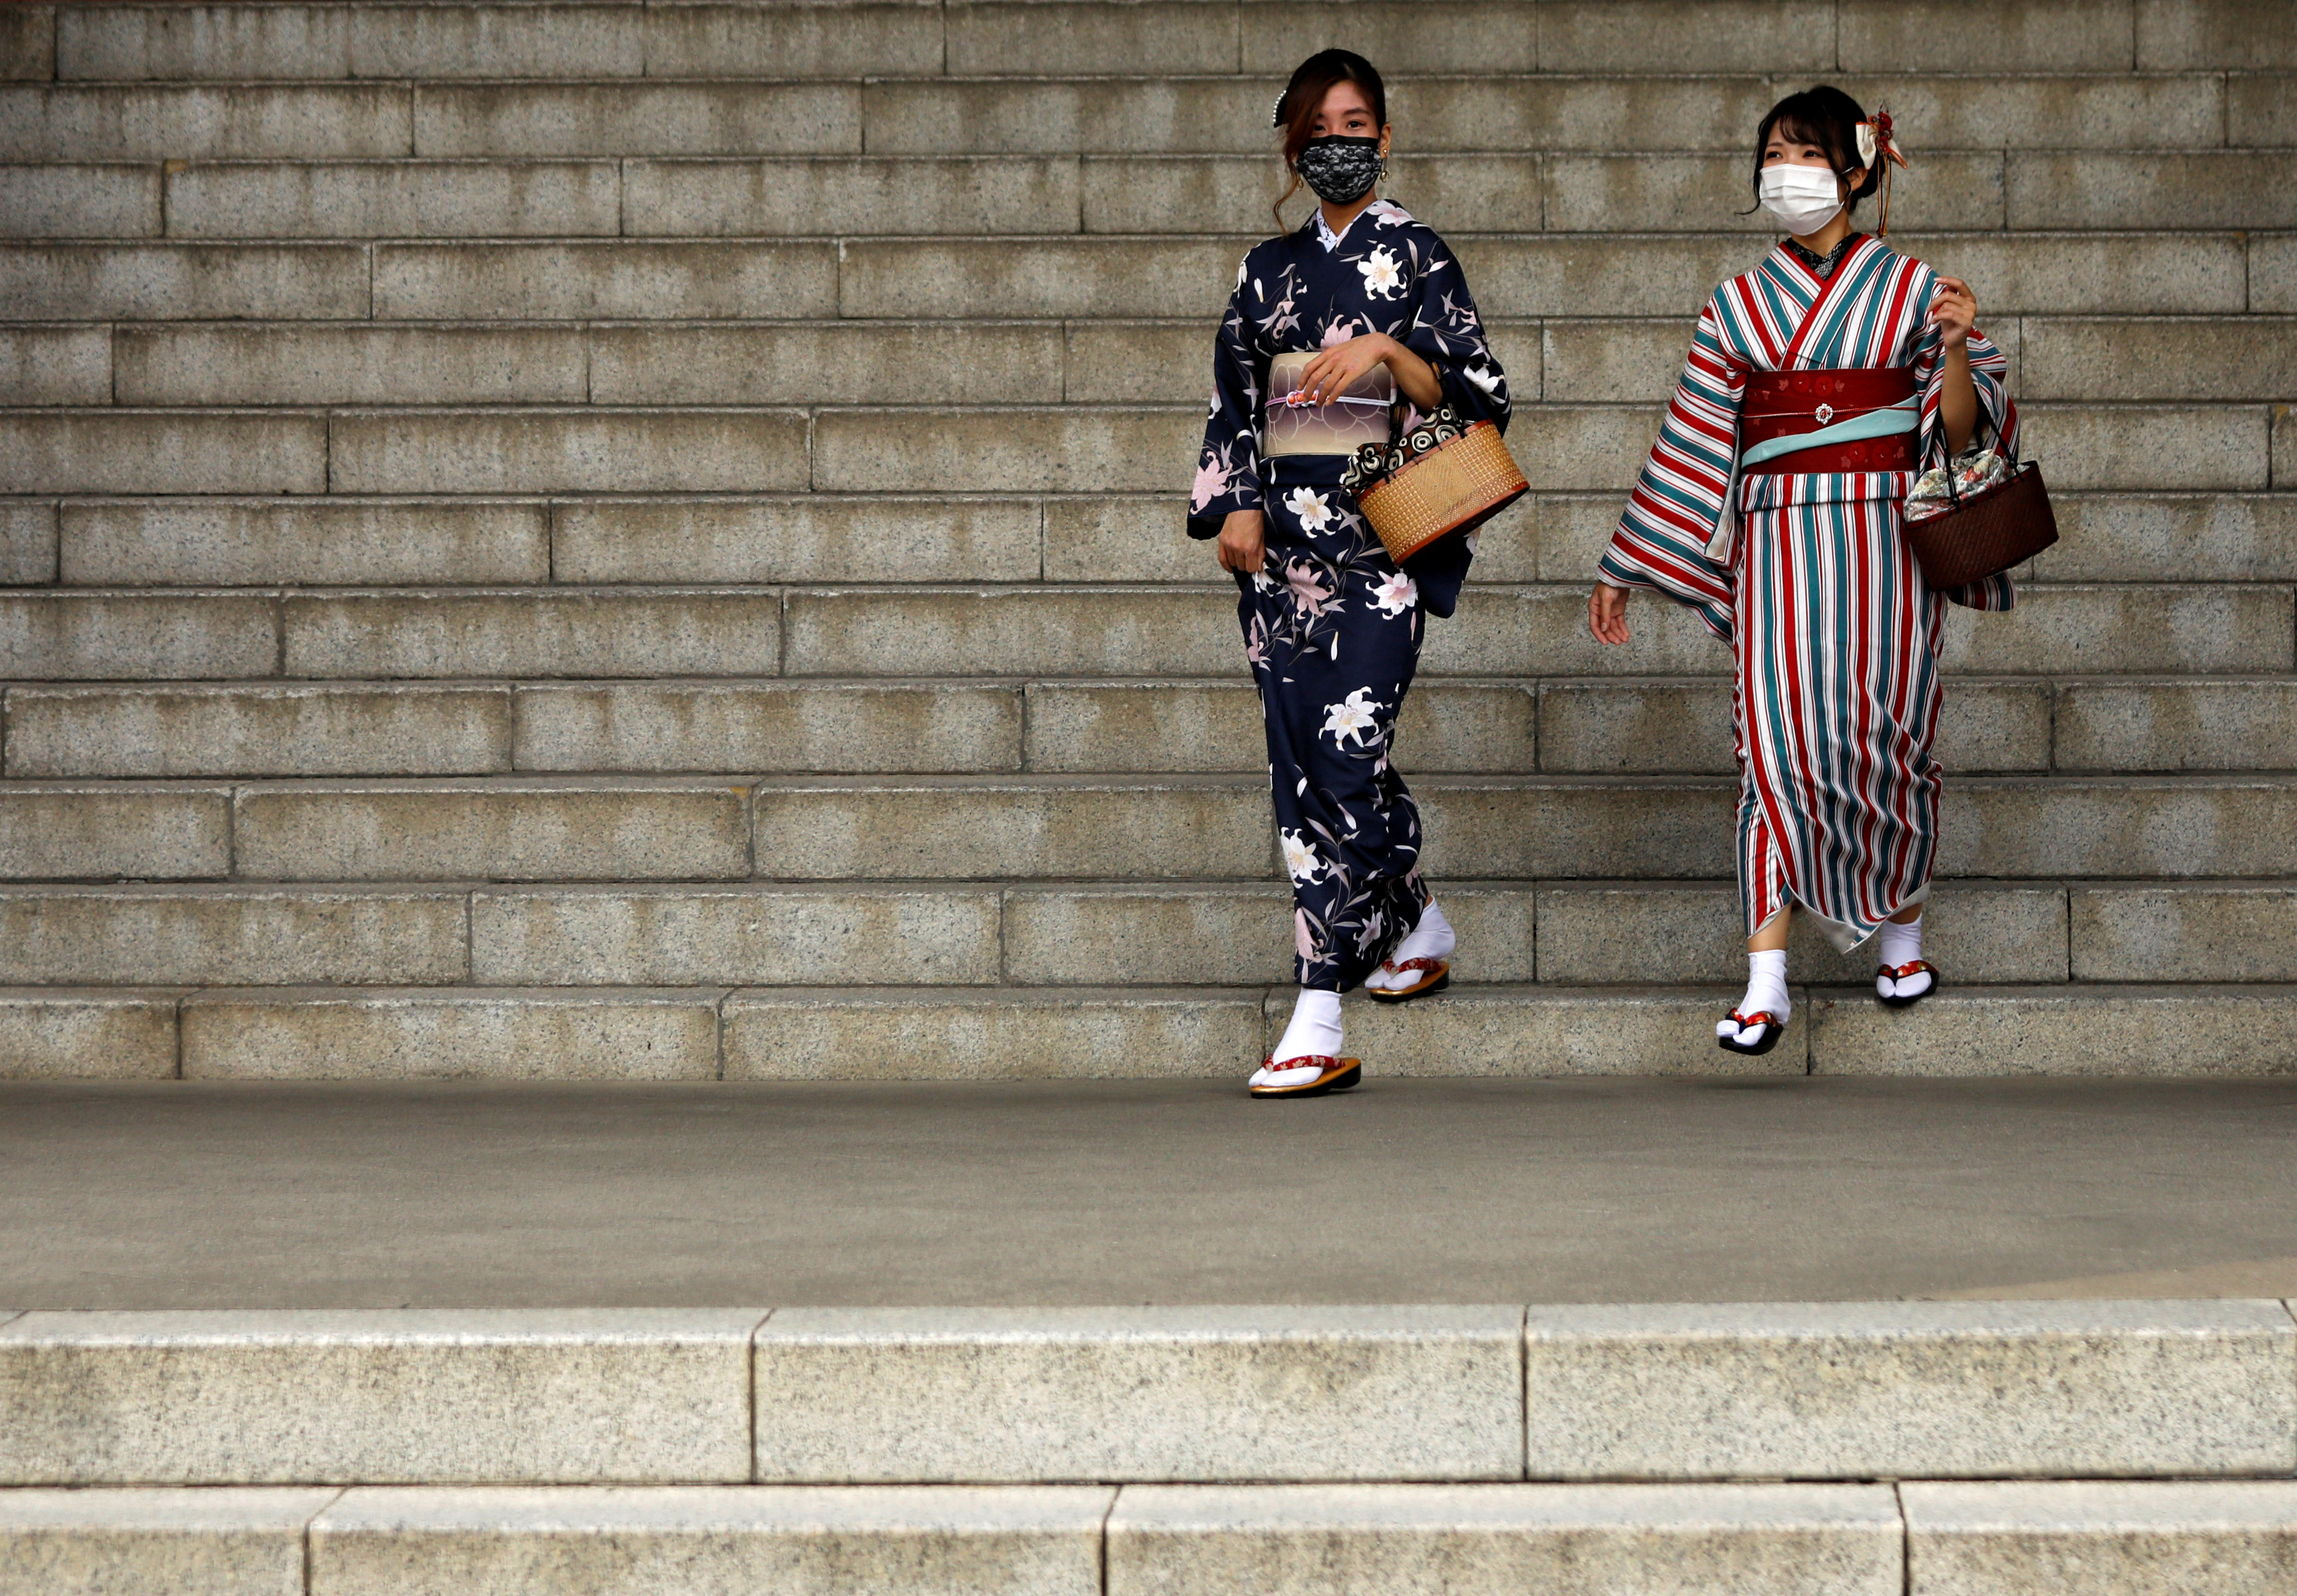 Kimono-clad tourists wearing protective face masks are seen at a temple at Asakusa district, a popular sightseeing spot, amid the coronavirus disease (COVID-19) outbreak in Tokyo